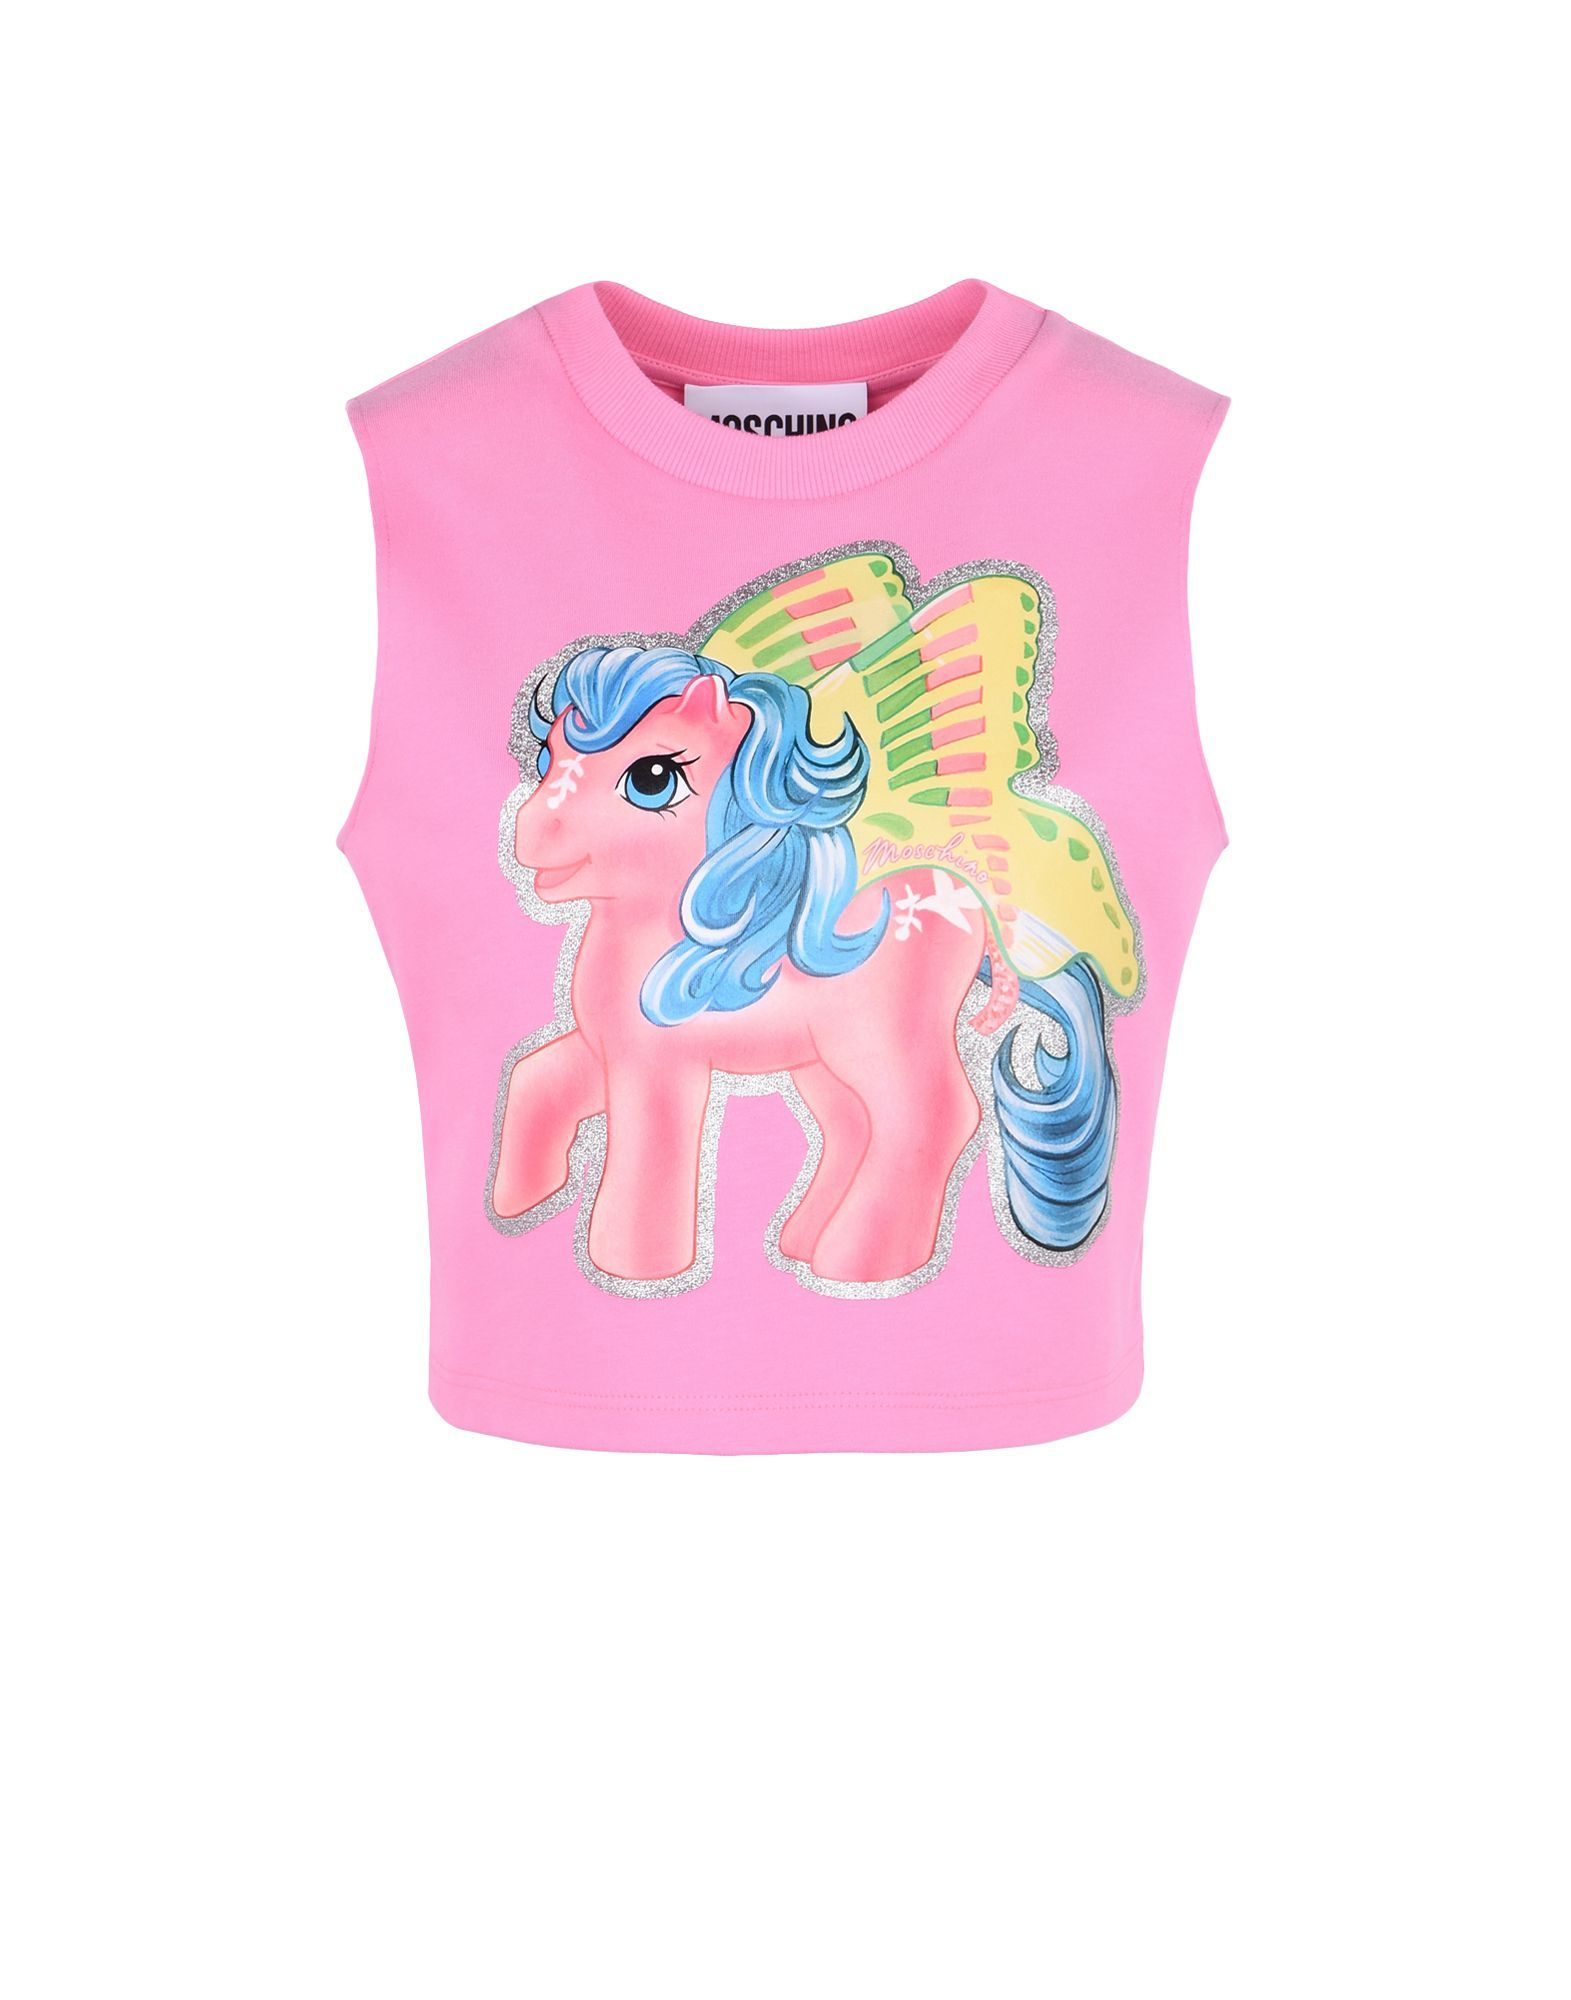 This Is What a $350 My Little Pony Tank Top Looks Like